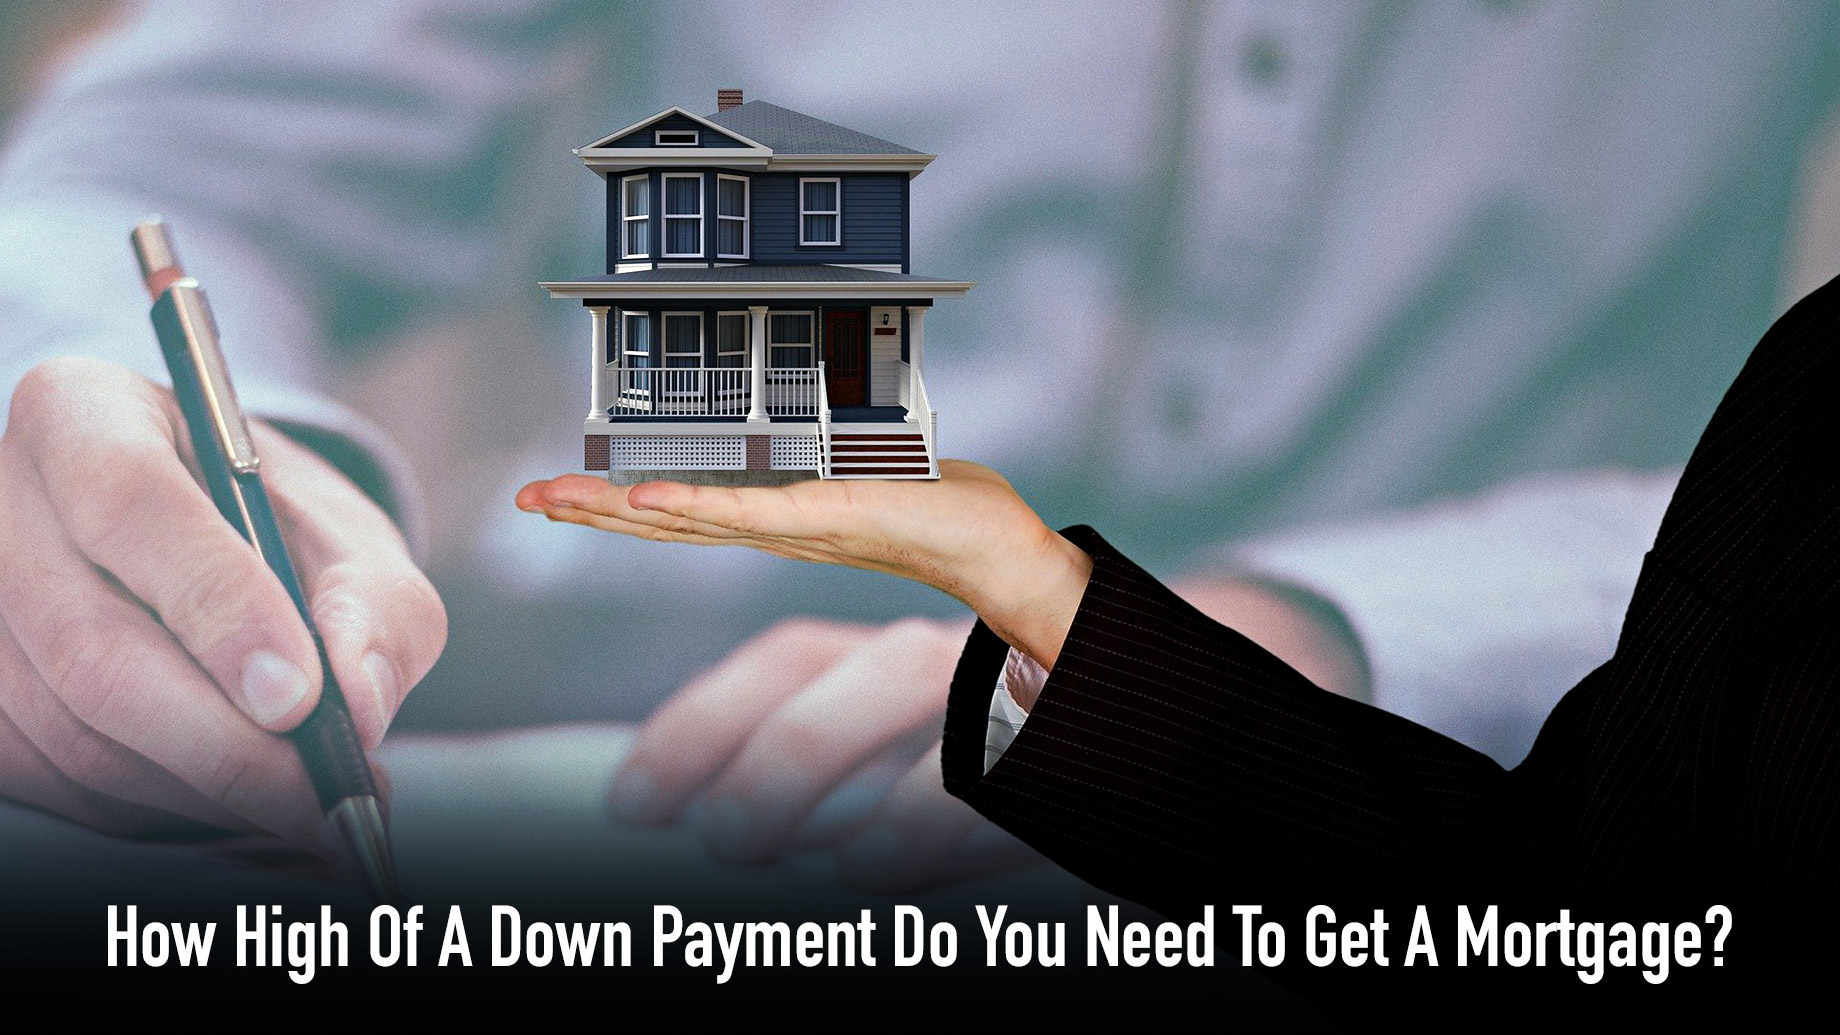 How High Of A Down Payment Do You Need To Get A Mortgage?